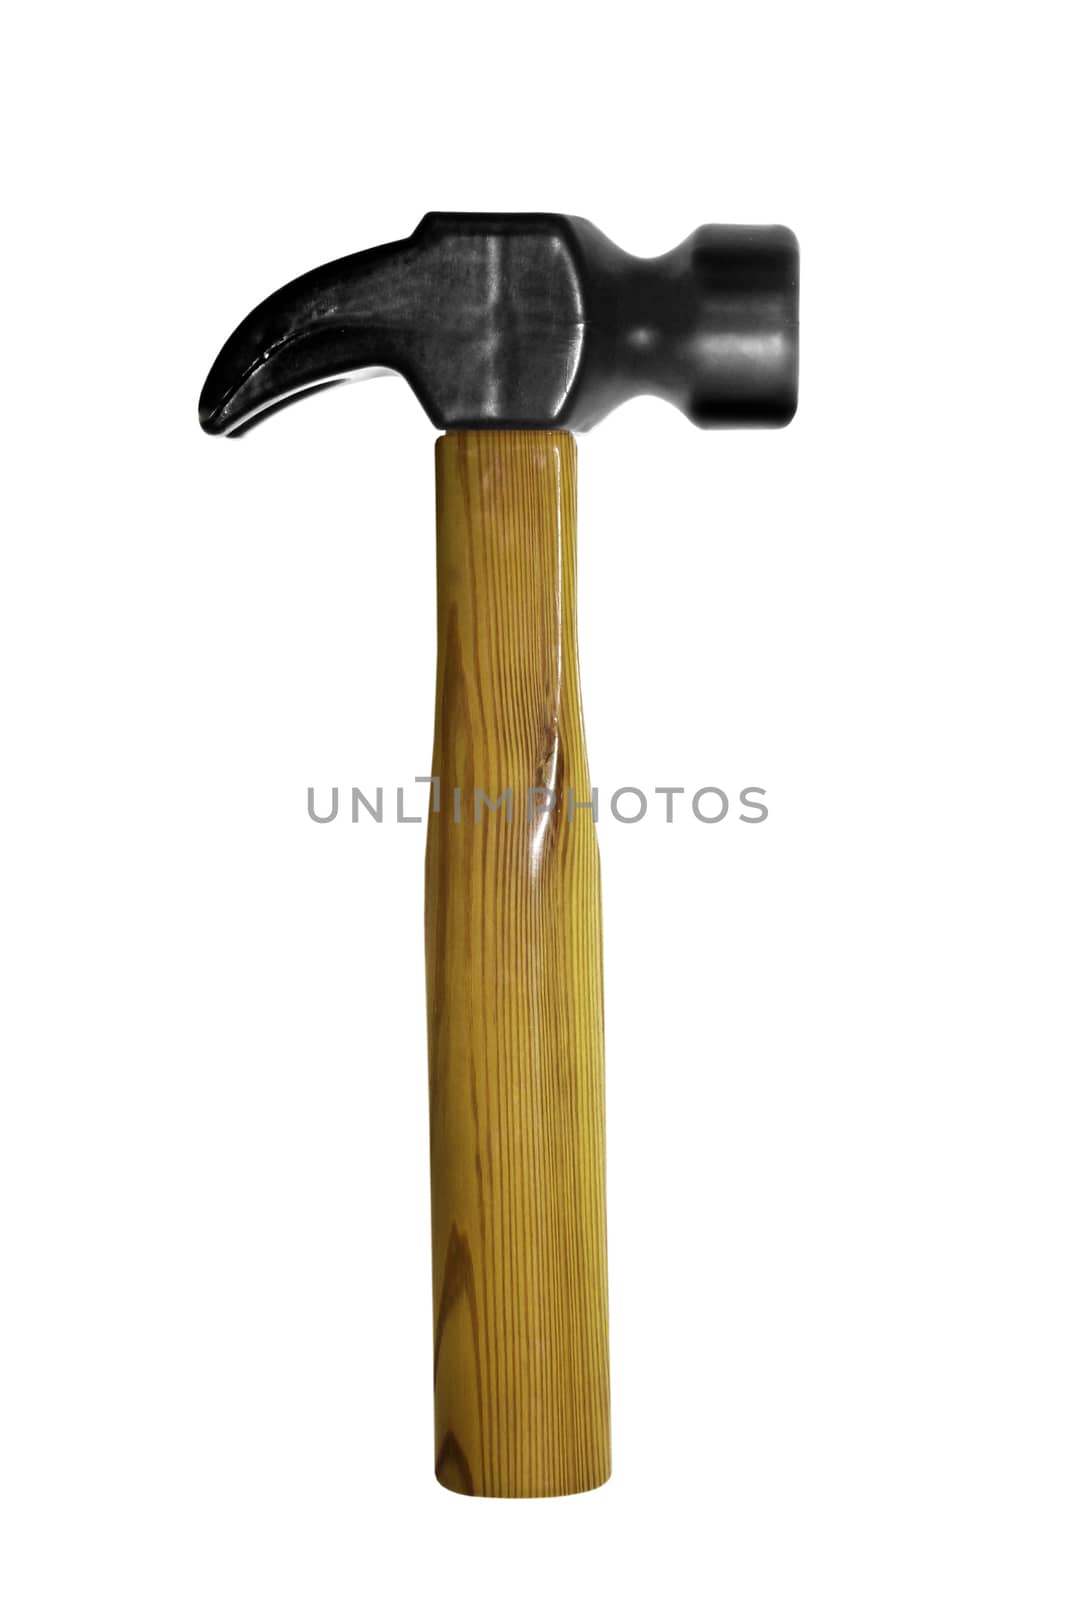 Work tool, Hammer by yands